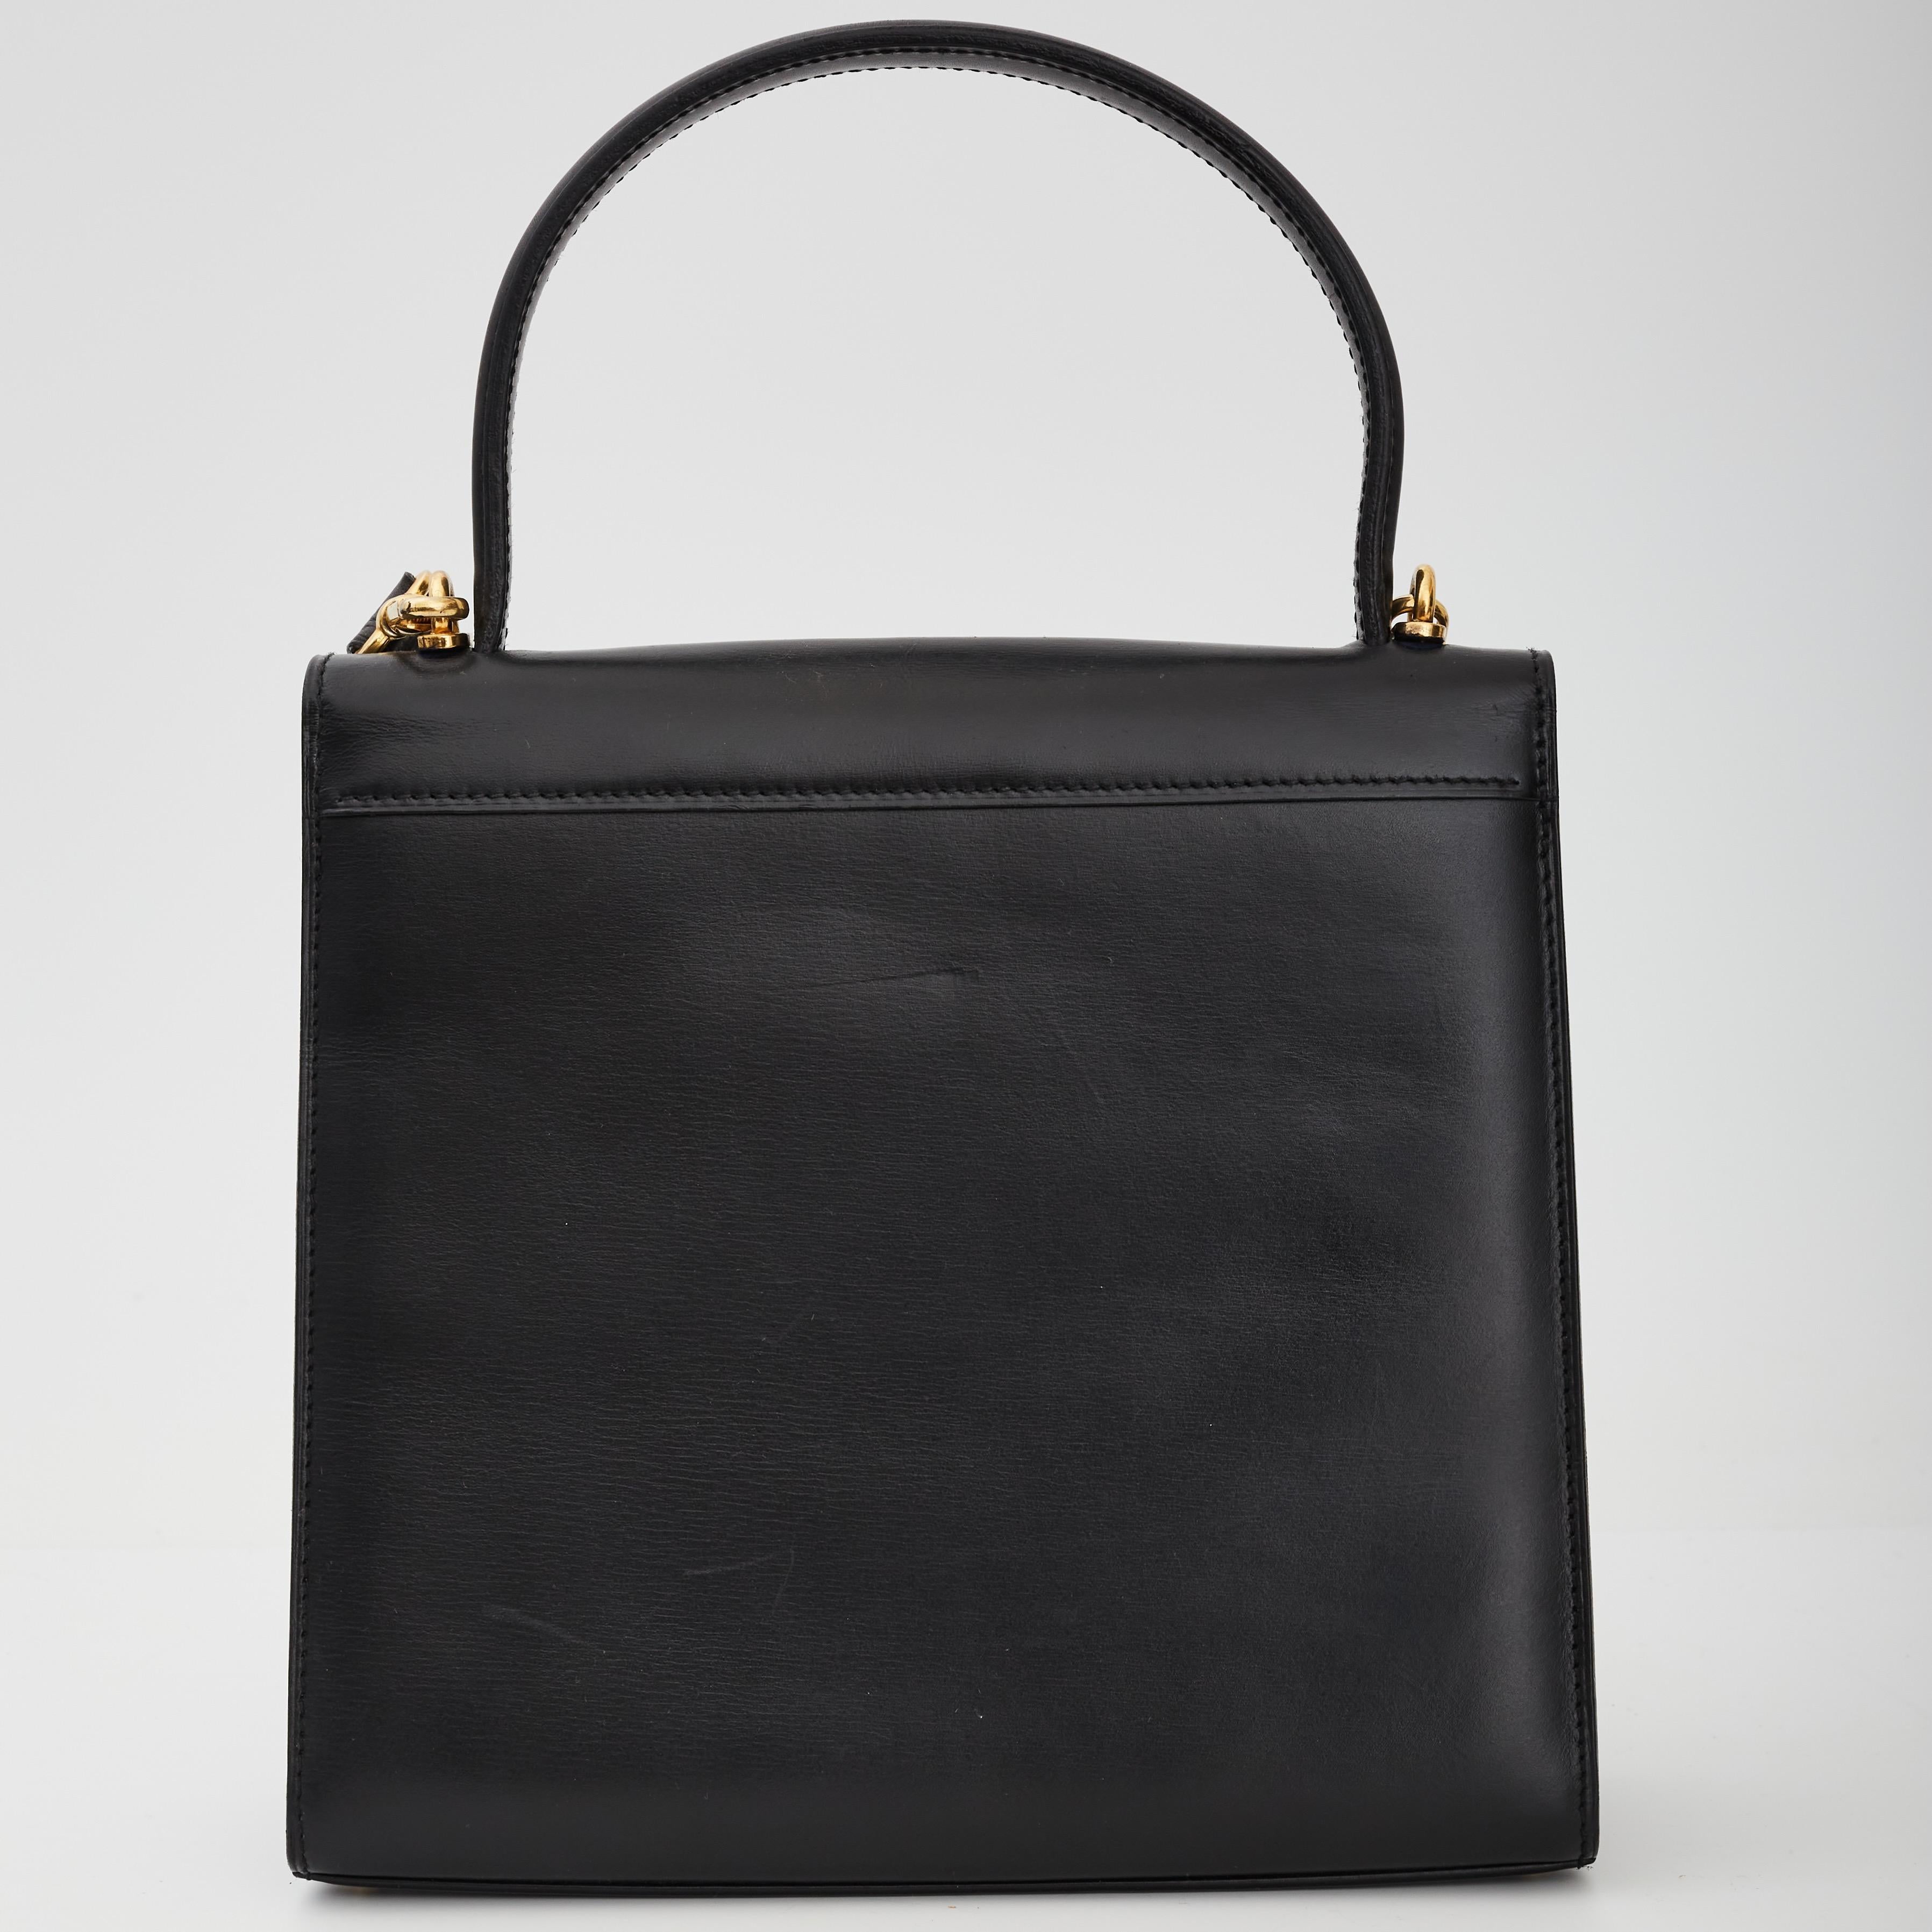 COLOR: Black
MATERIAL: Calfskin
MEASURES: H 9” x L 9.25” x D 3.25”
DROP: 6” (top handle) & 17.5 (shoulder strap)
CONDITION: Very good - light indentations, marks, scratches to exterior and interior leather. The bag was professionally dyed. 

Made in